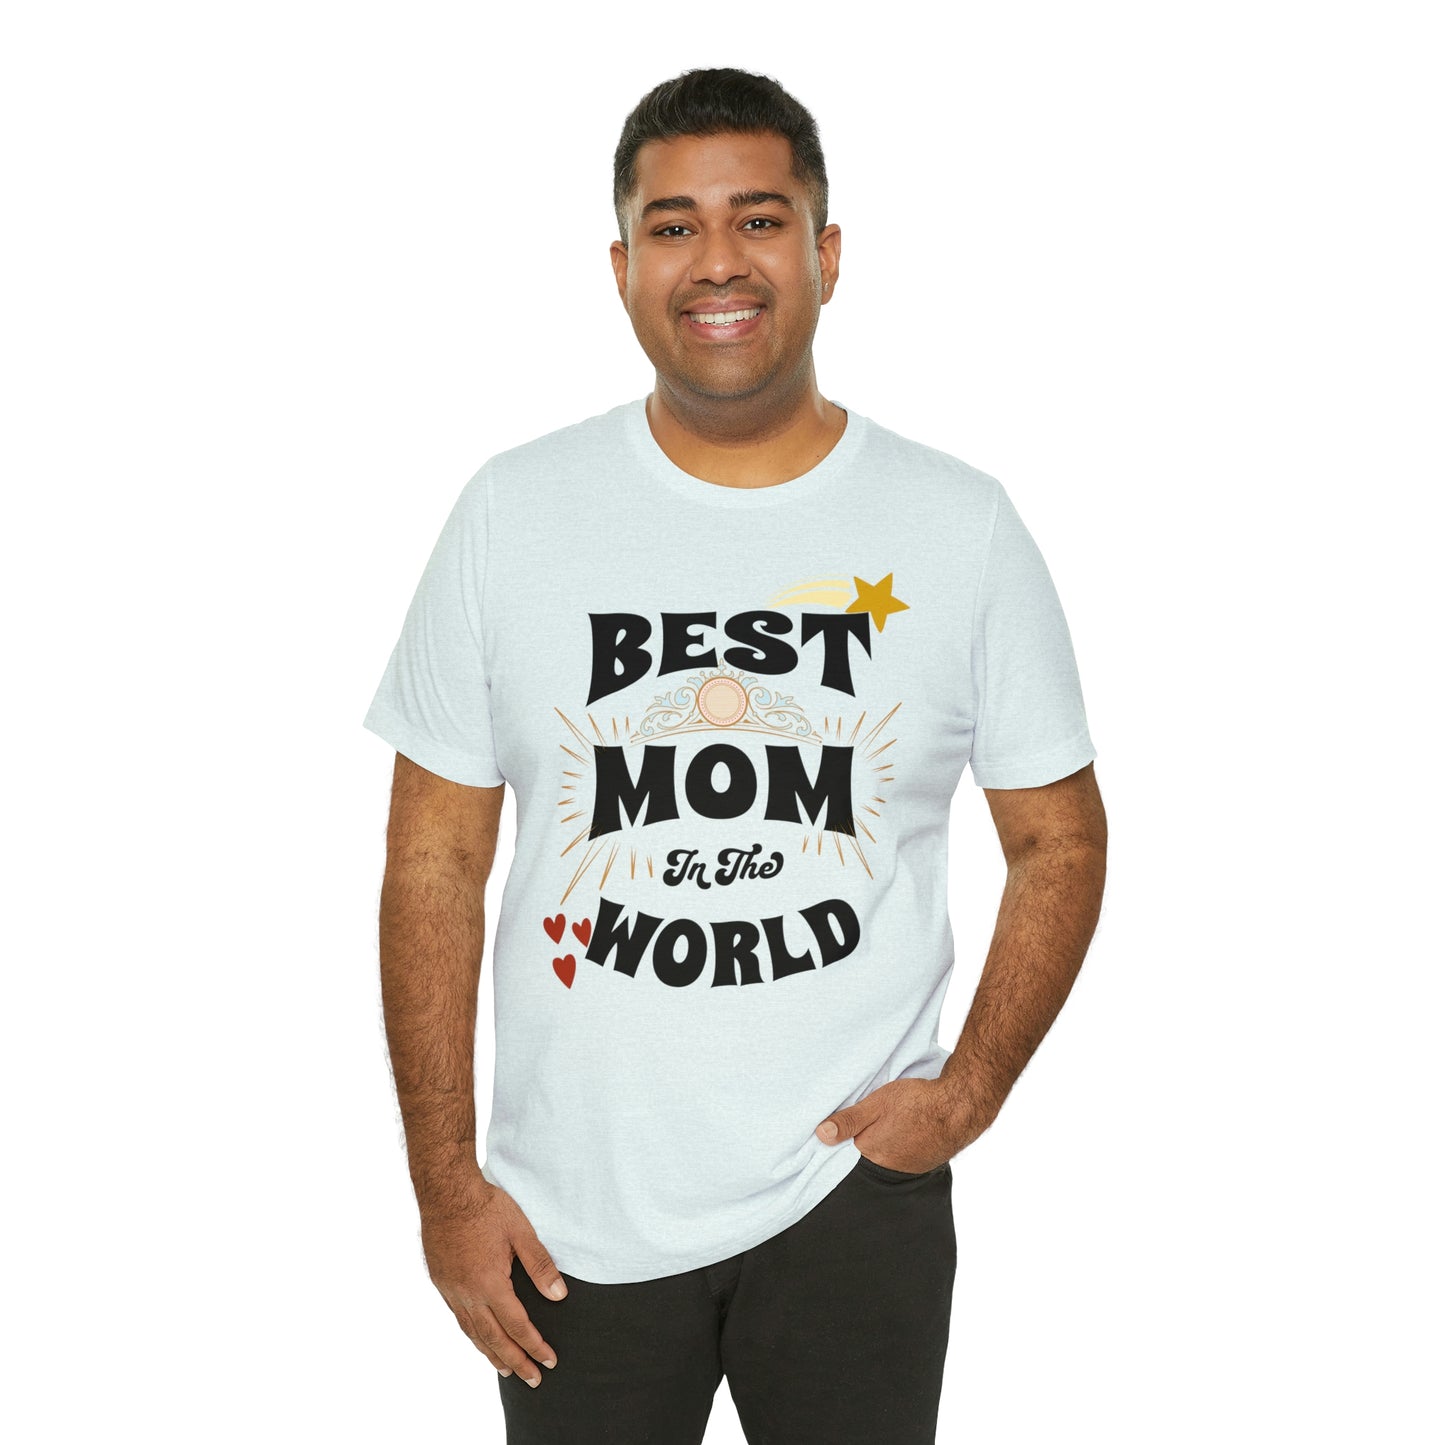 Unisex Jersey Short Sleeve Tee, Best Mom in the World Gift